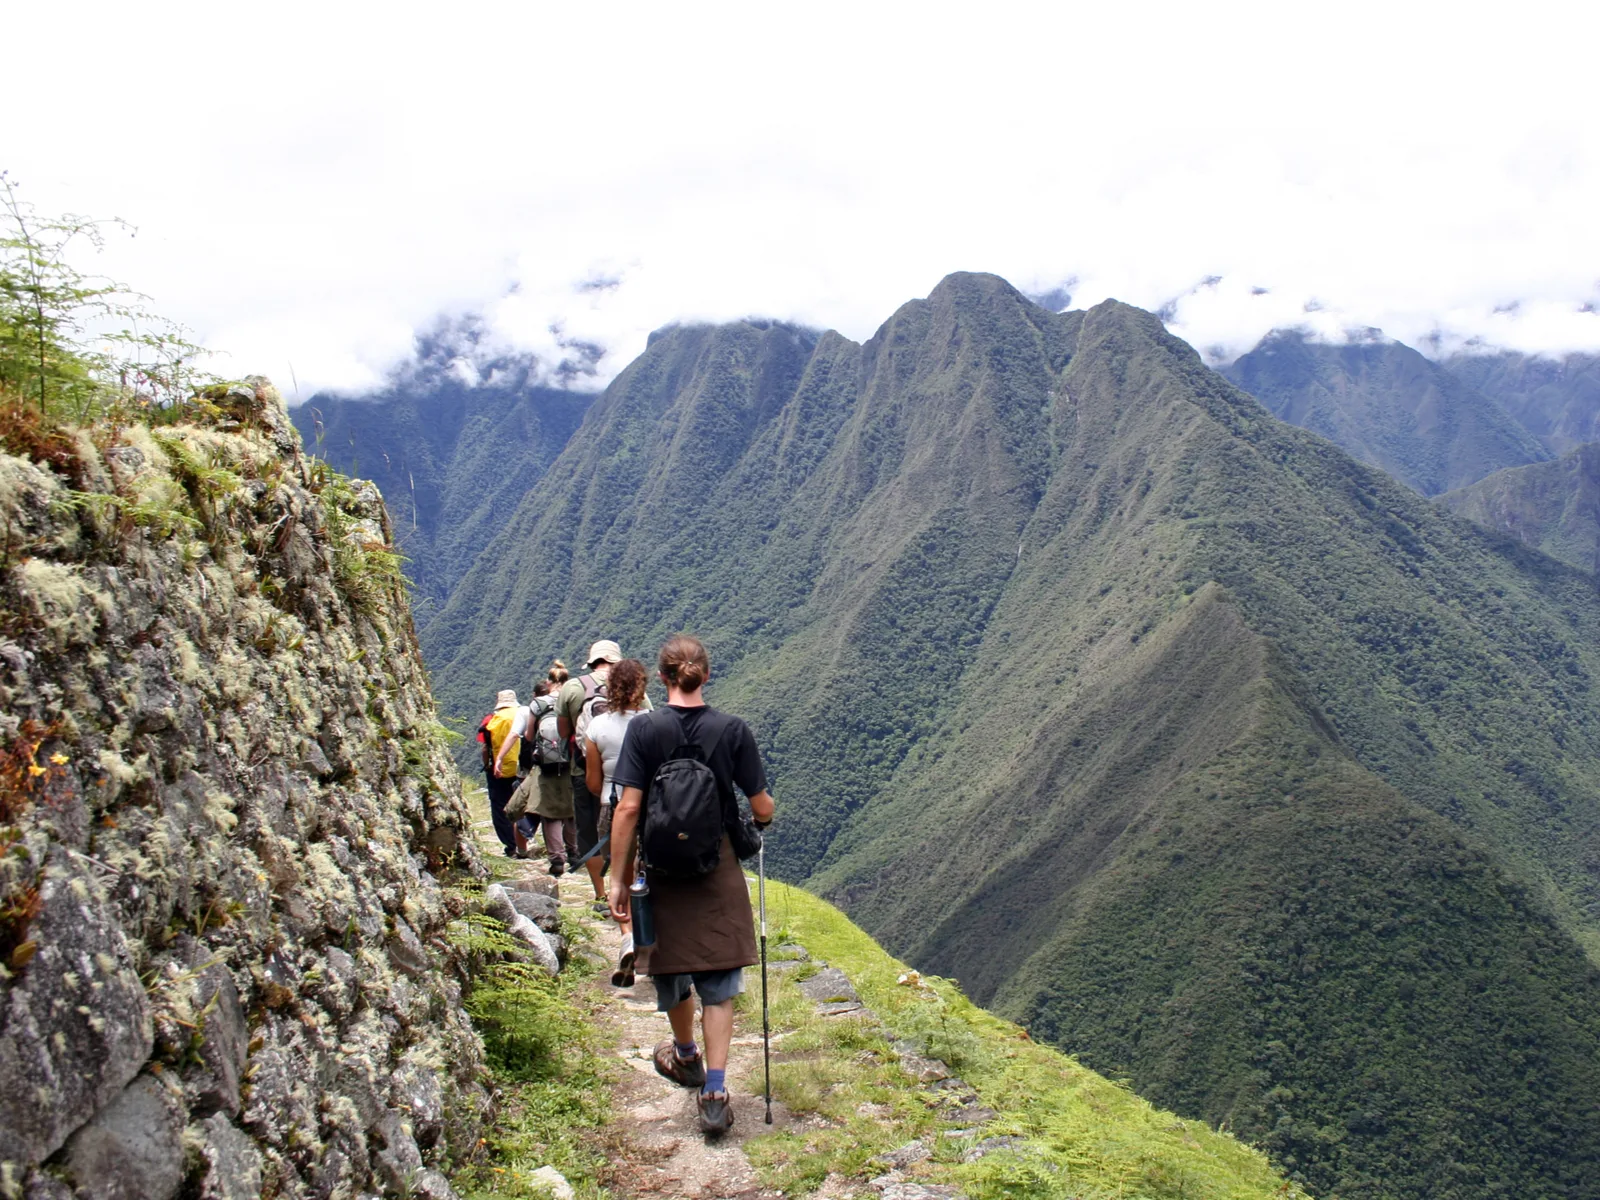 People walking the Inca trail through the Sacred Valley during the least busy time to visit Machu Picchu